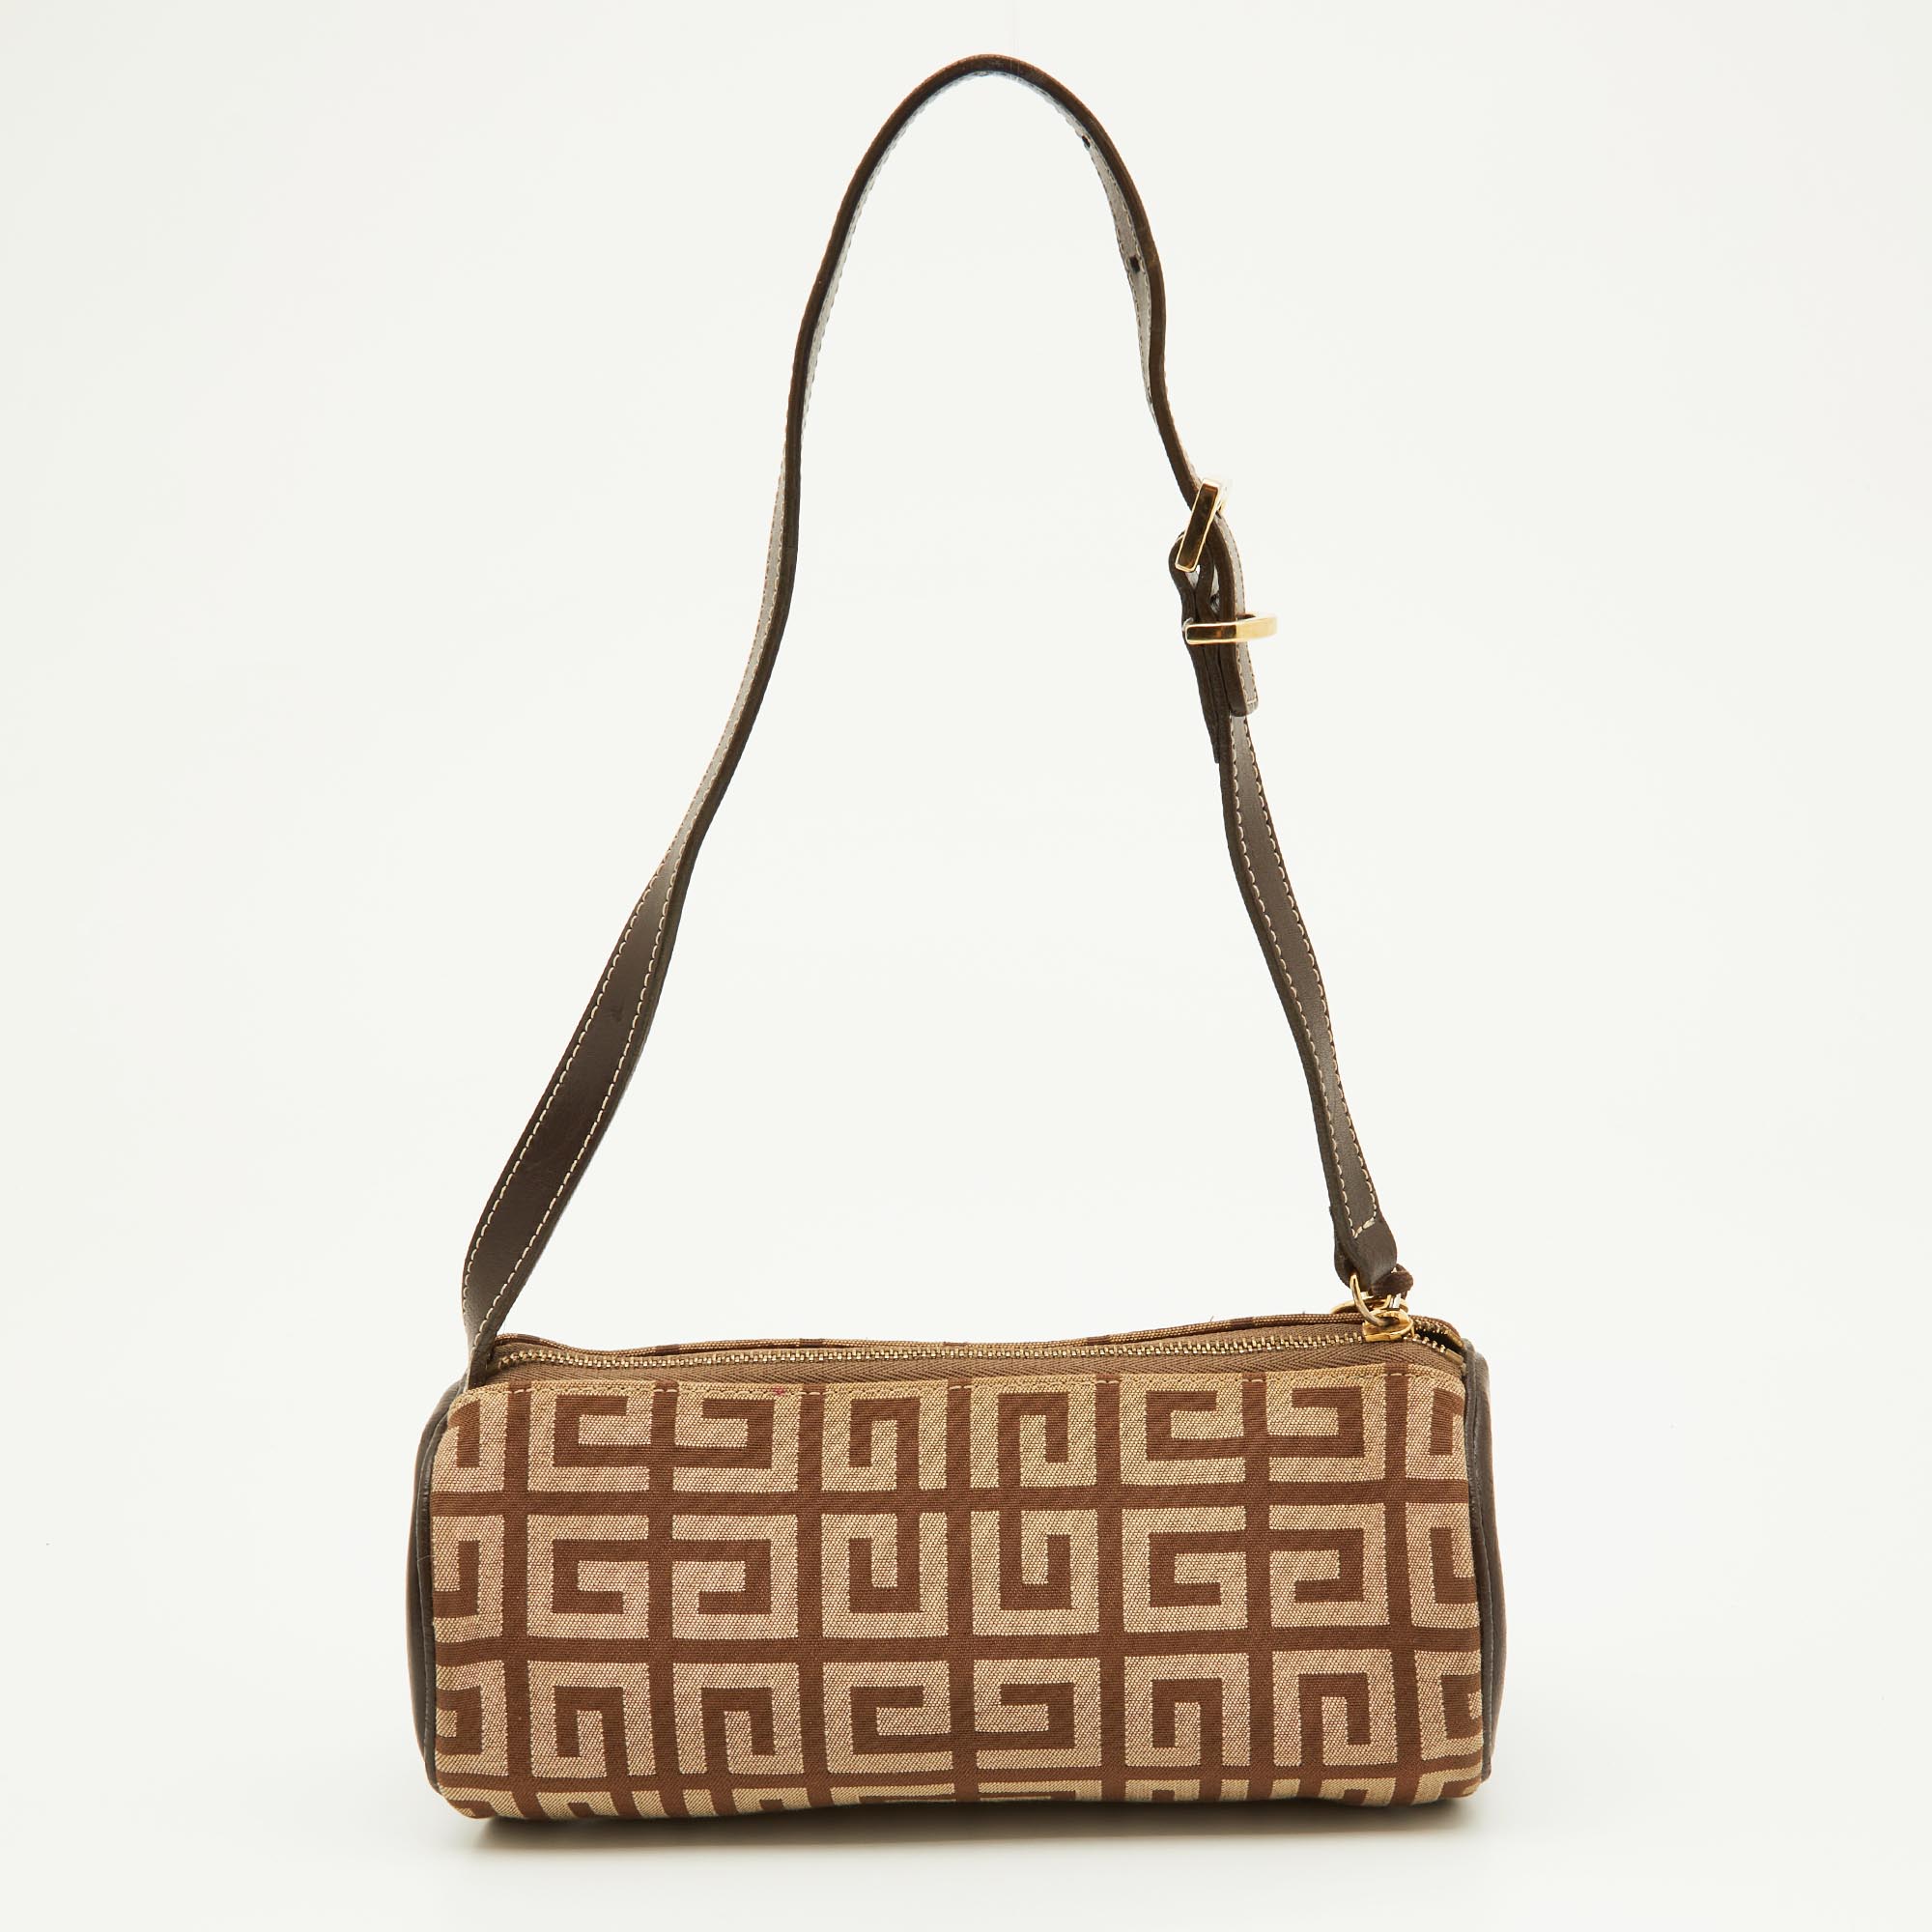 Givenchy Beige/Brown Monogram Canvas And Leather Bag